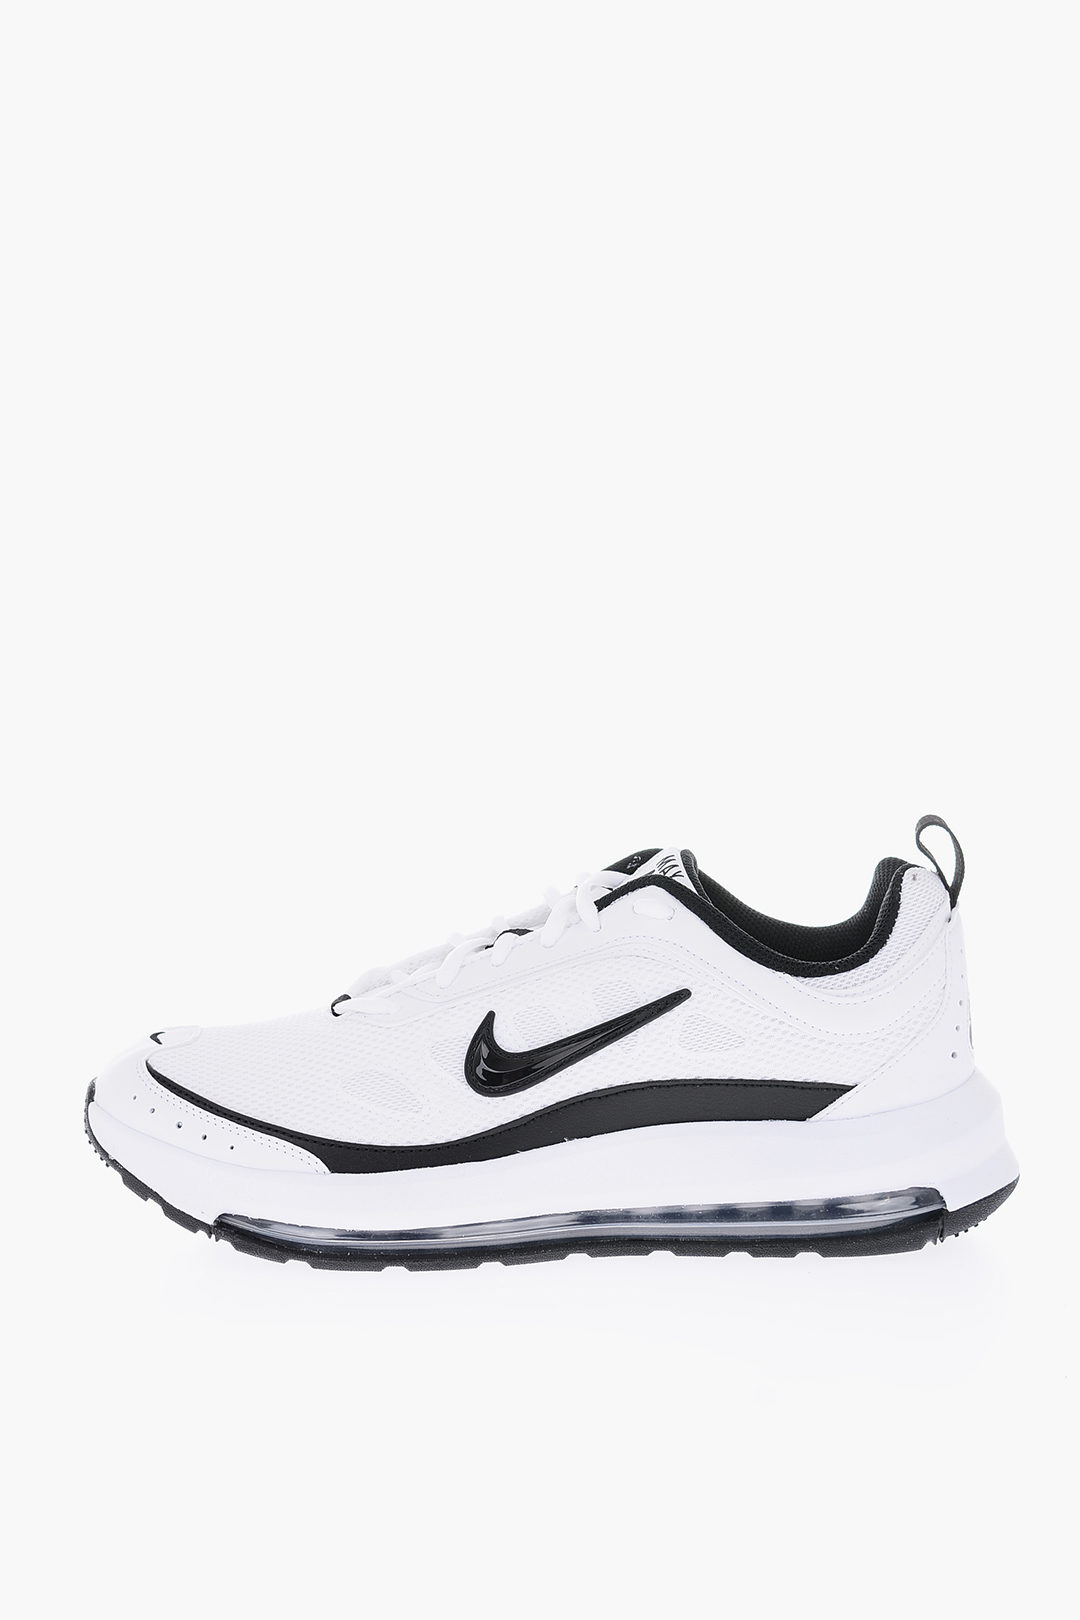 Nike two-tone faux leather and fabric AIR MAX sneakers men - Glamood Outlet